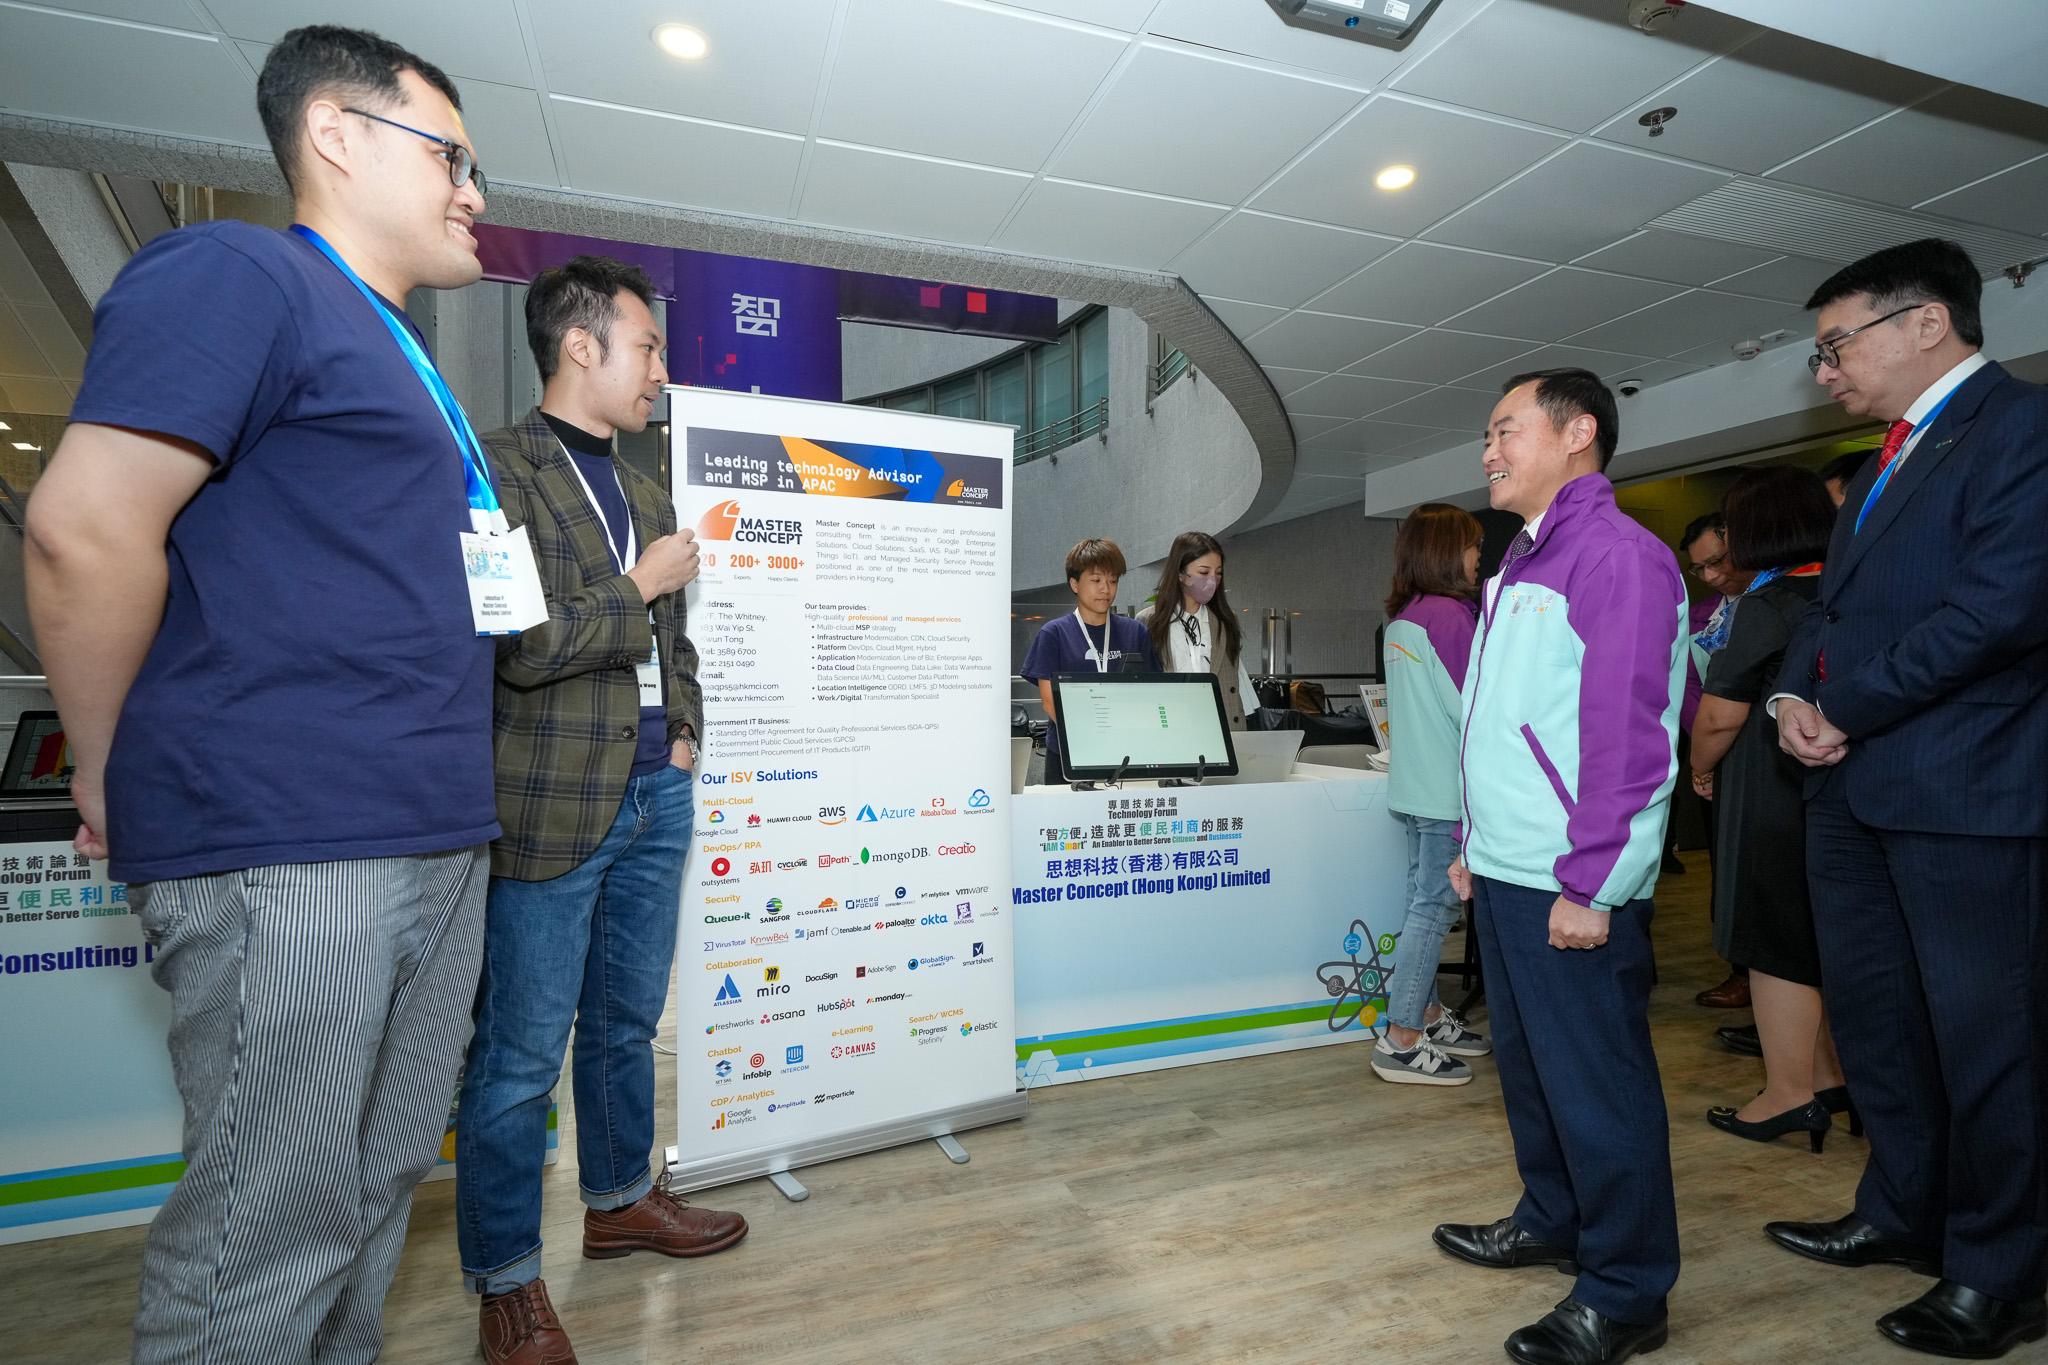 The Government Chief Information Officer, Mr Tony Wong (second right), tours exhibition booths during the 17th Technology Forum today (October 13) to exchange views with the innovation and technology sector members.